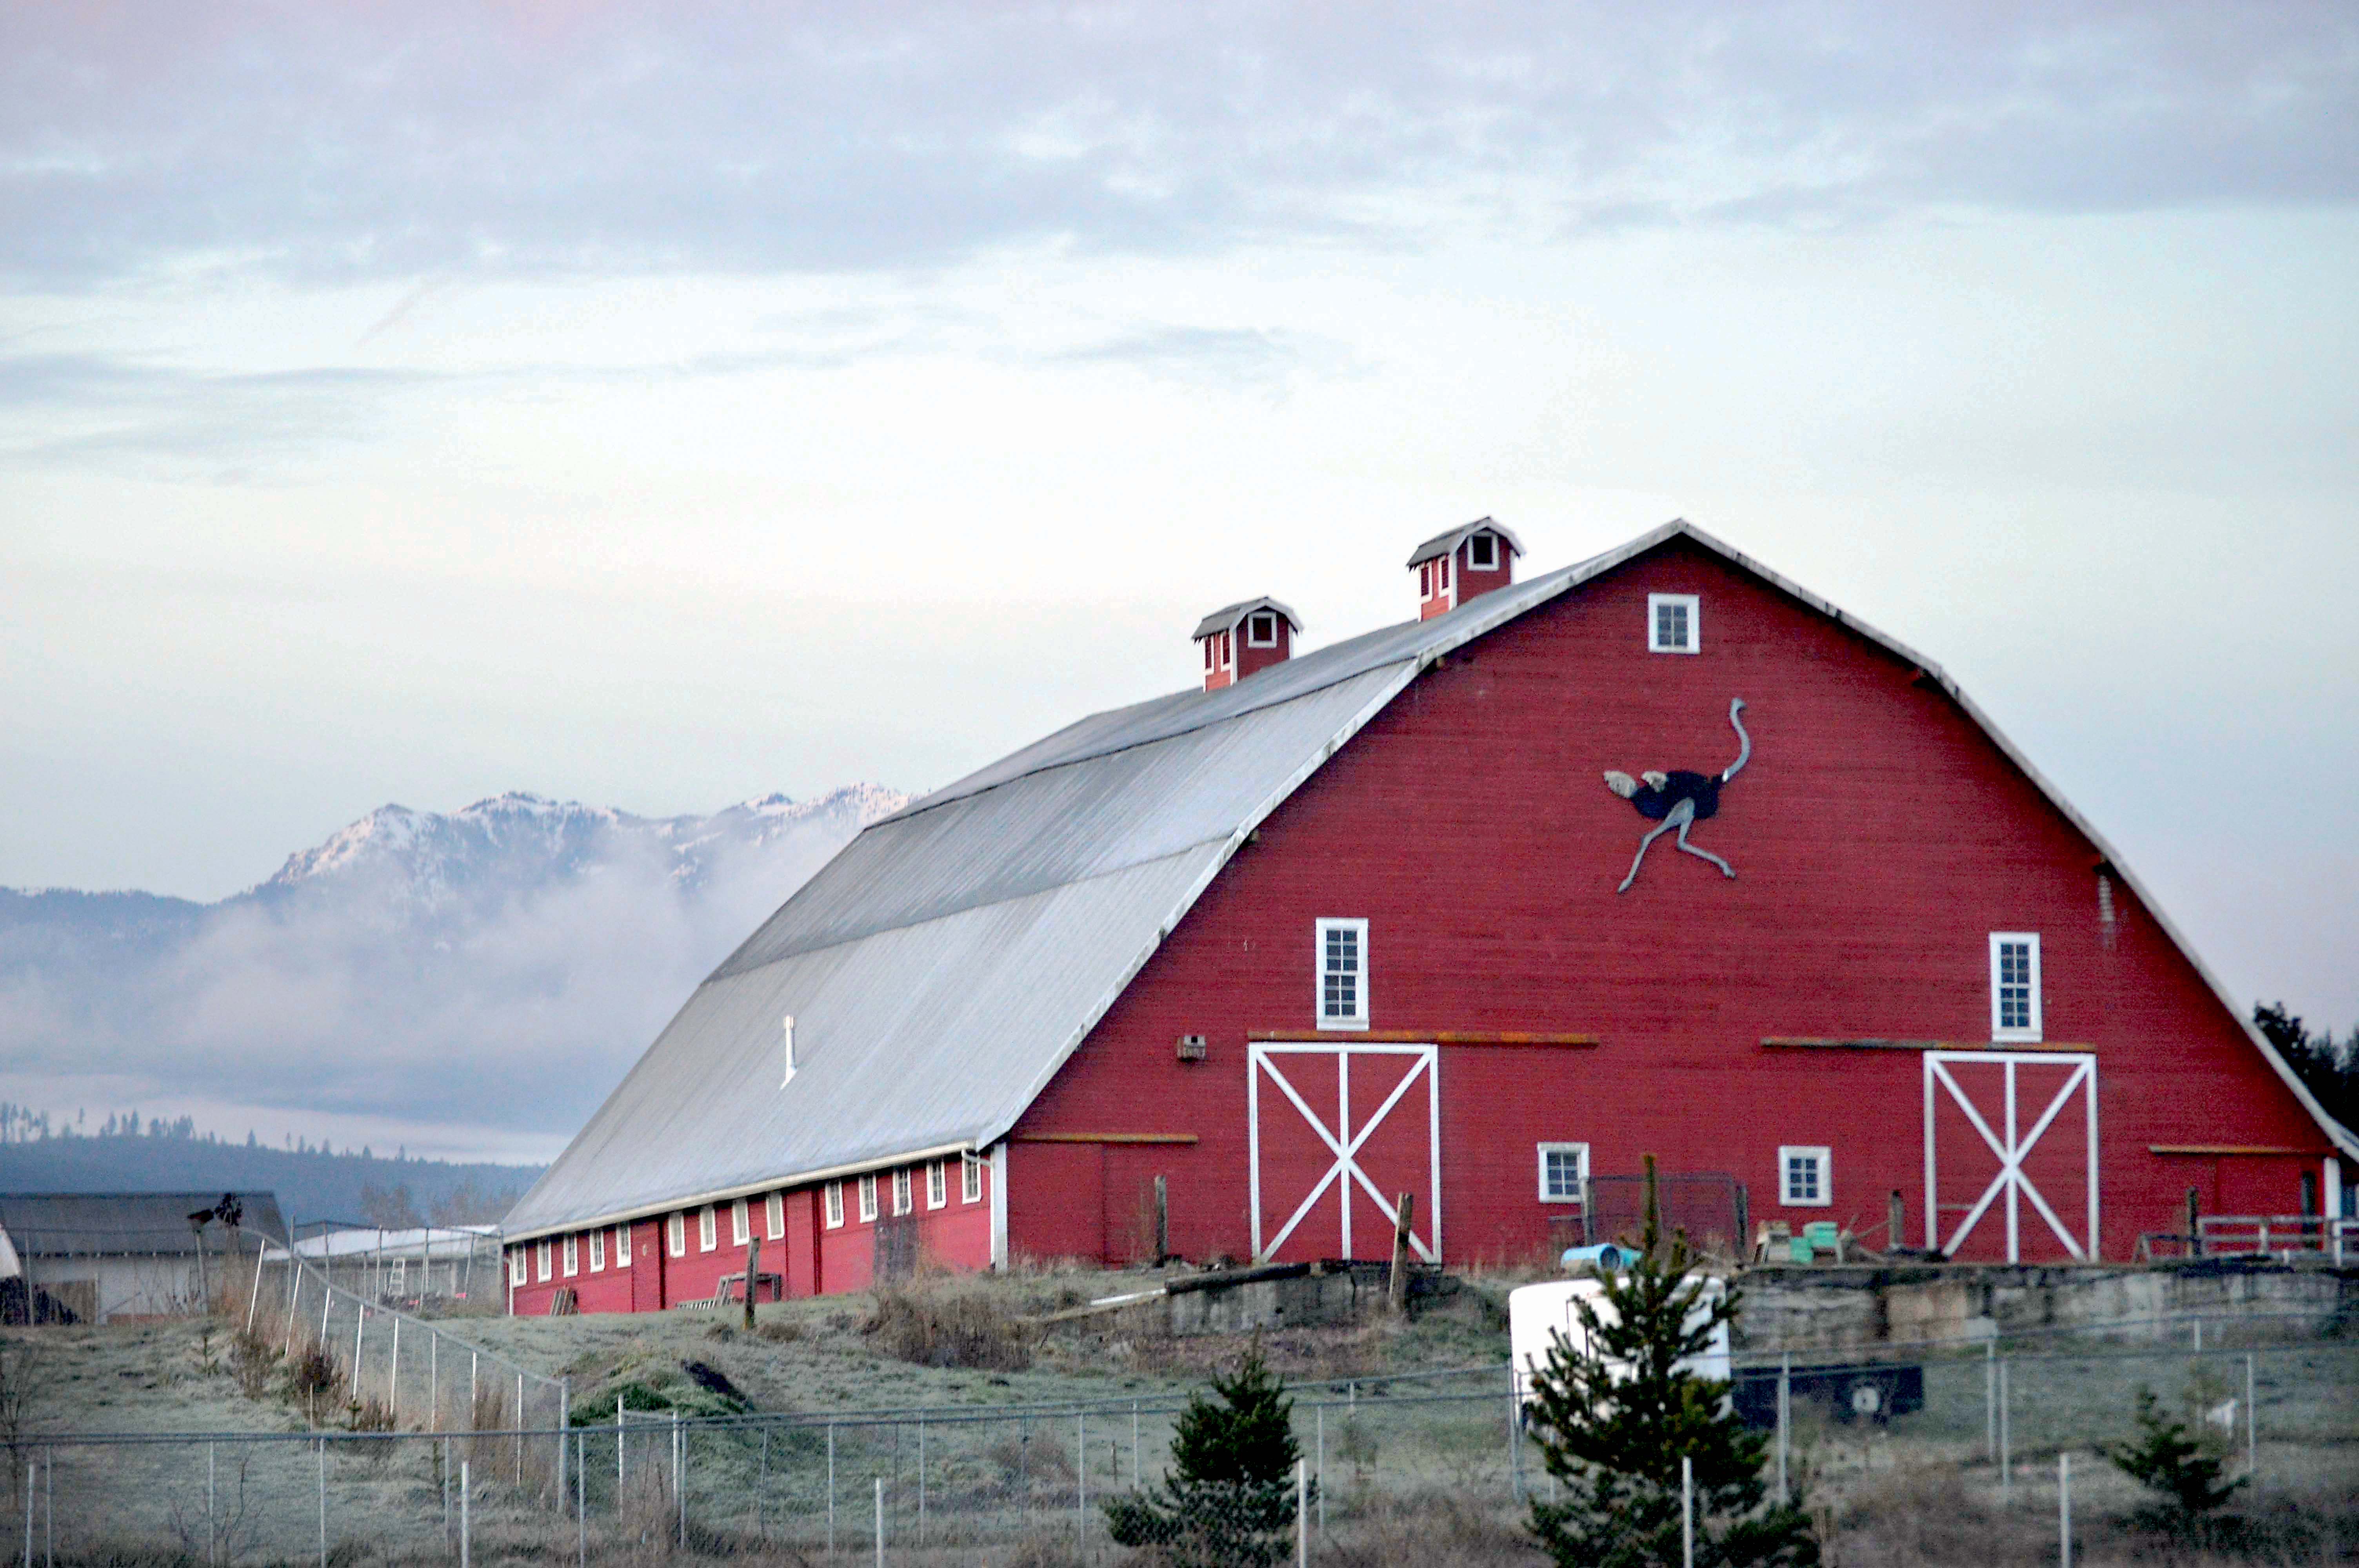 Photo of the Big Barn at 702 Kitchen-Dick Road west of Sequim by Diane Urbani de la Paz/Peninsula Daily News